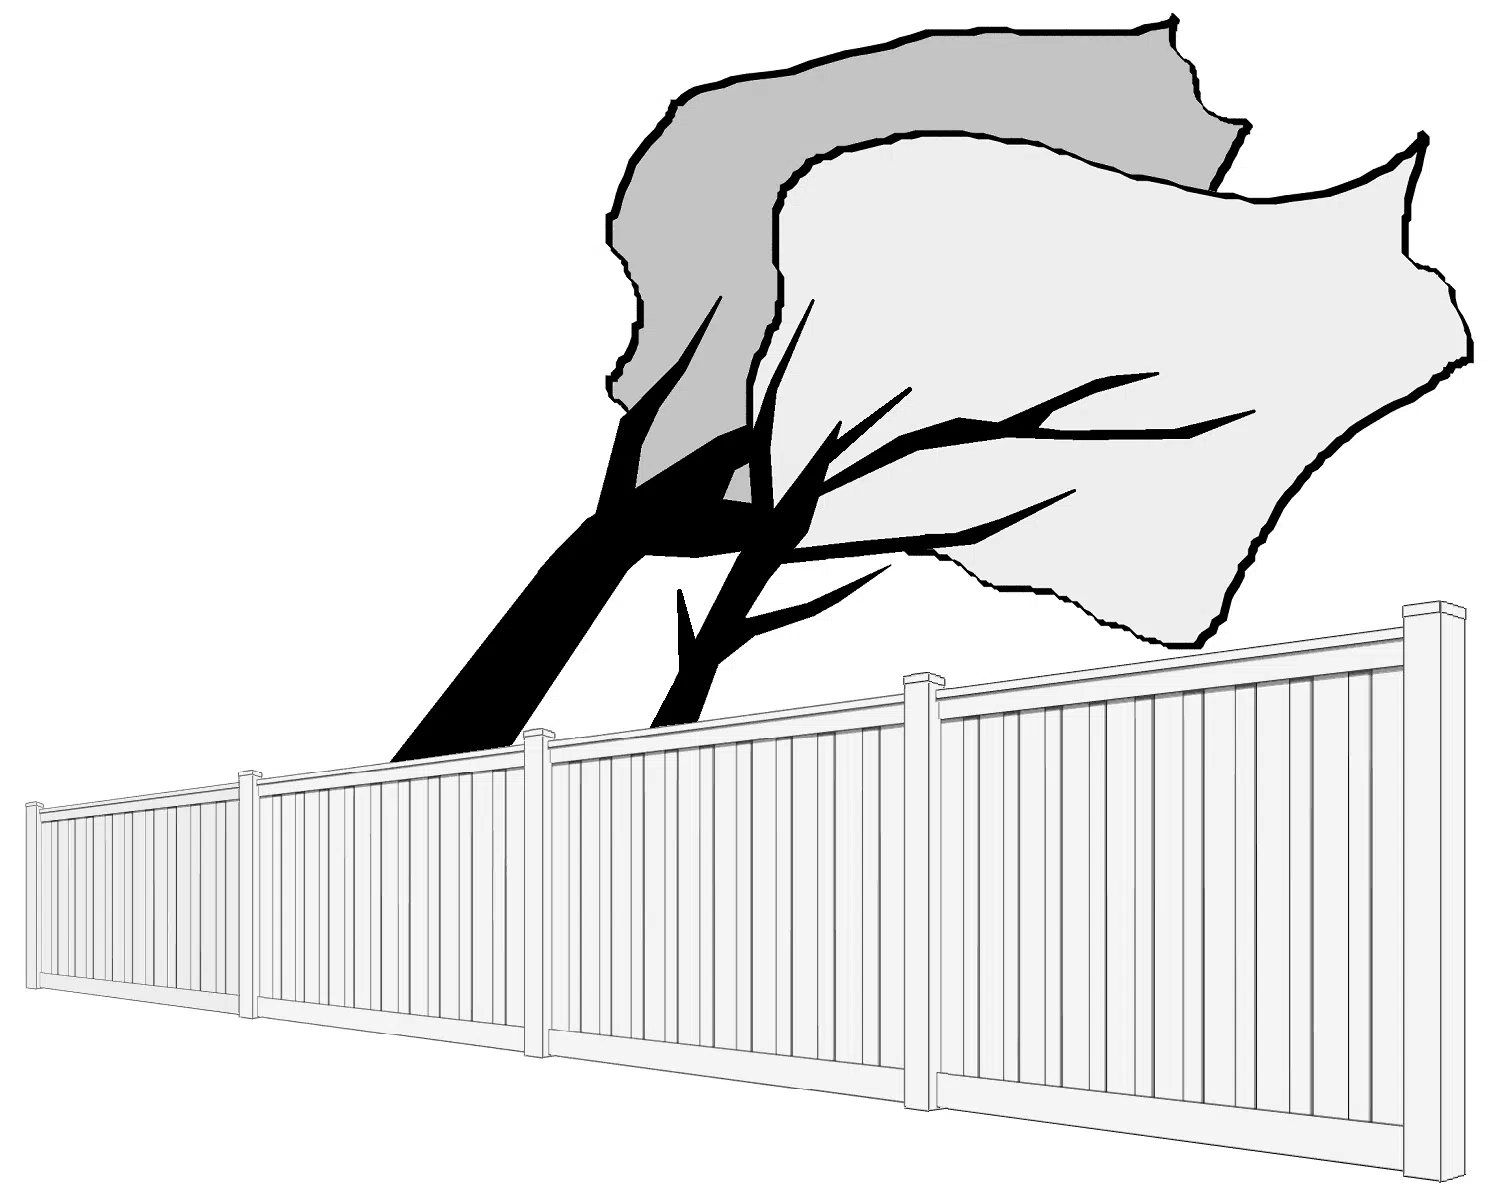 Clip art image of a Trex Fence standing up to high winds while trees are being blown hard behind the fence.